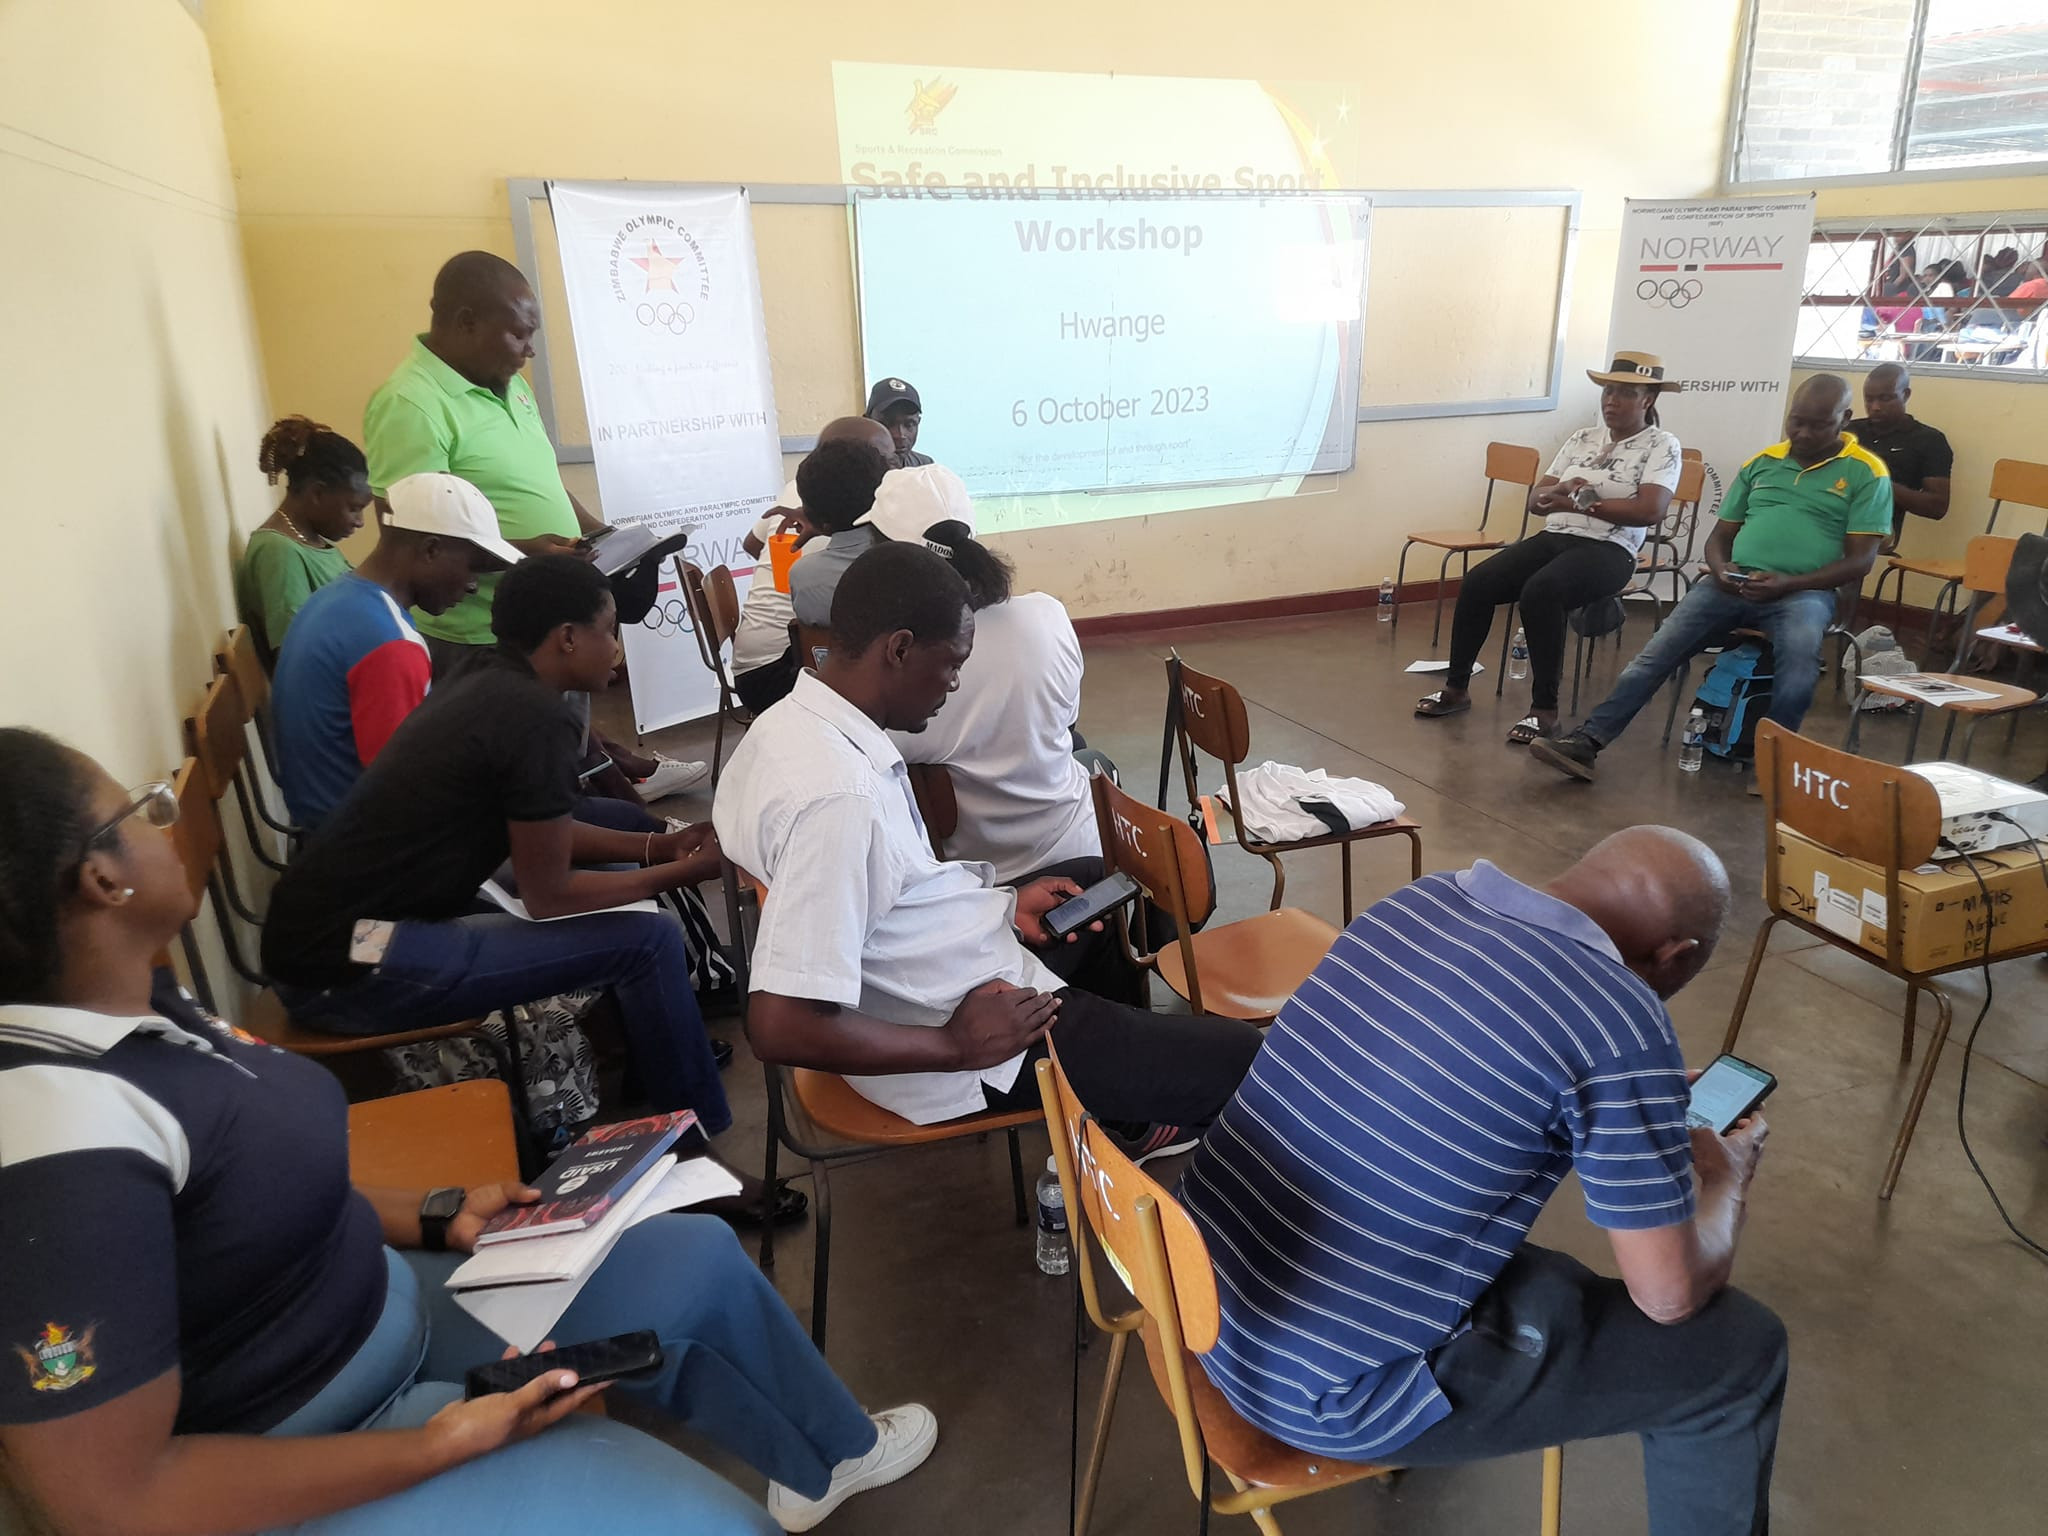 Zimbabwe Olympic Committee stages safe and inclusive sport workshop